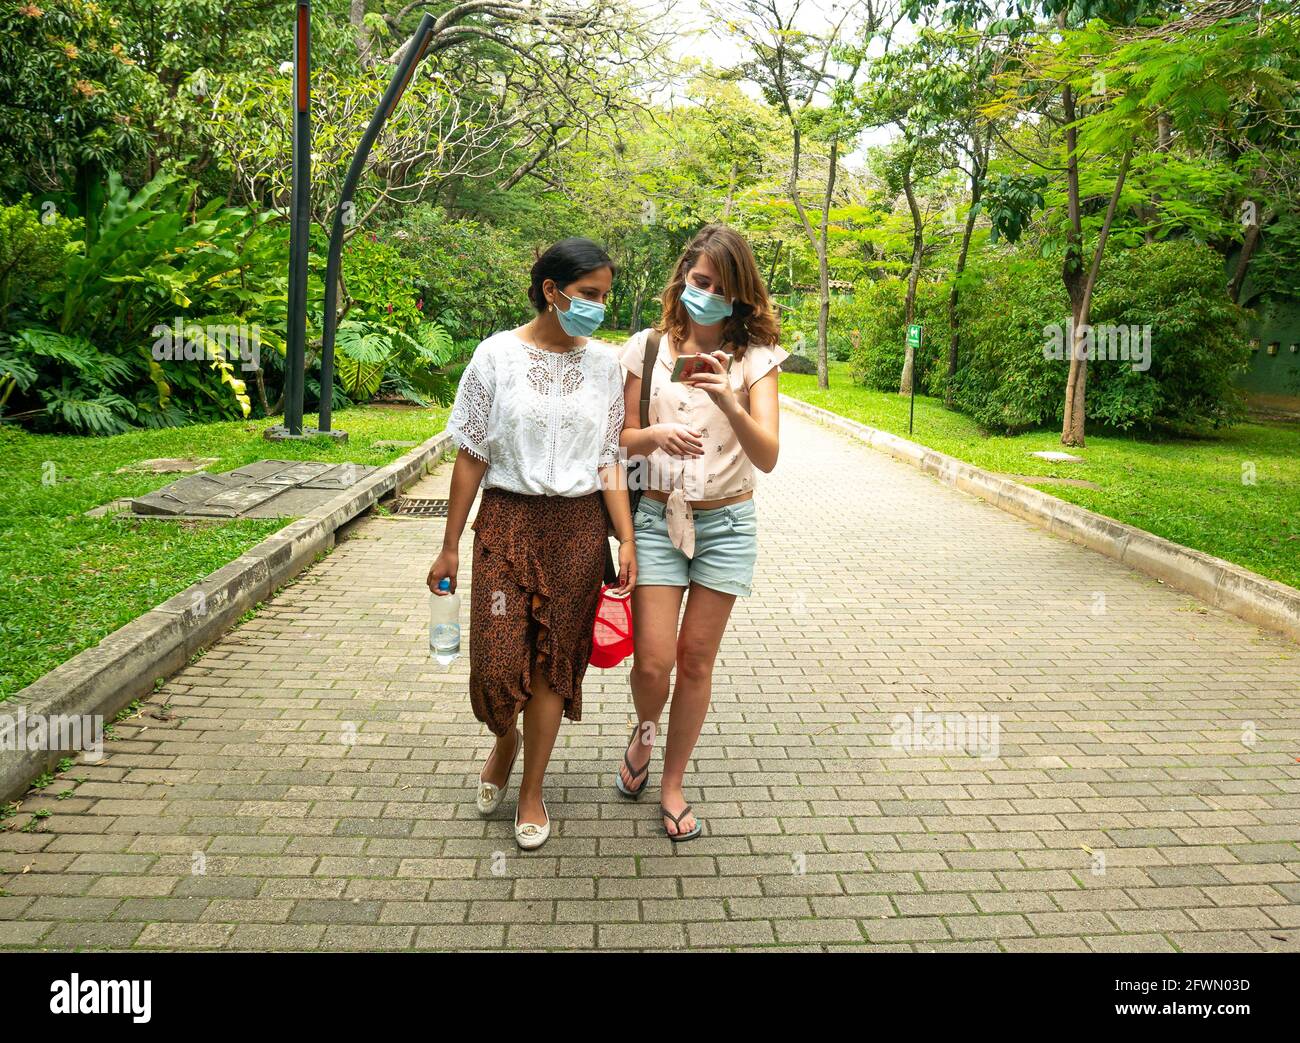 Medellin, Antioquia, Colombia - January 6 2021: Latin and Caucasian Women Wearing a Face Mask are Walking in a Park with a lot of Trees Stock Photo